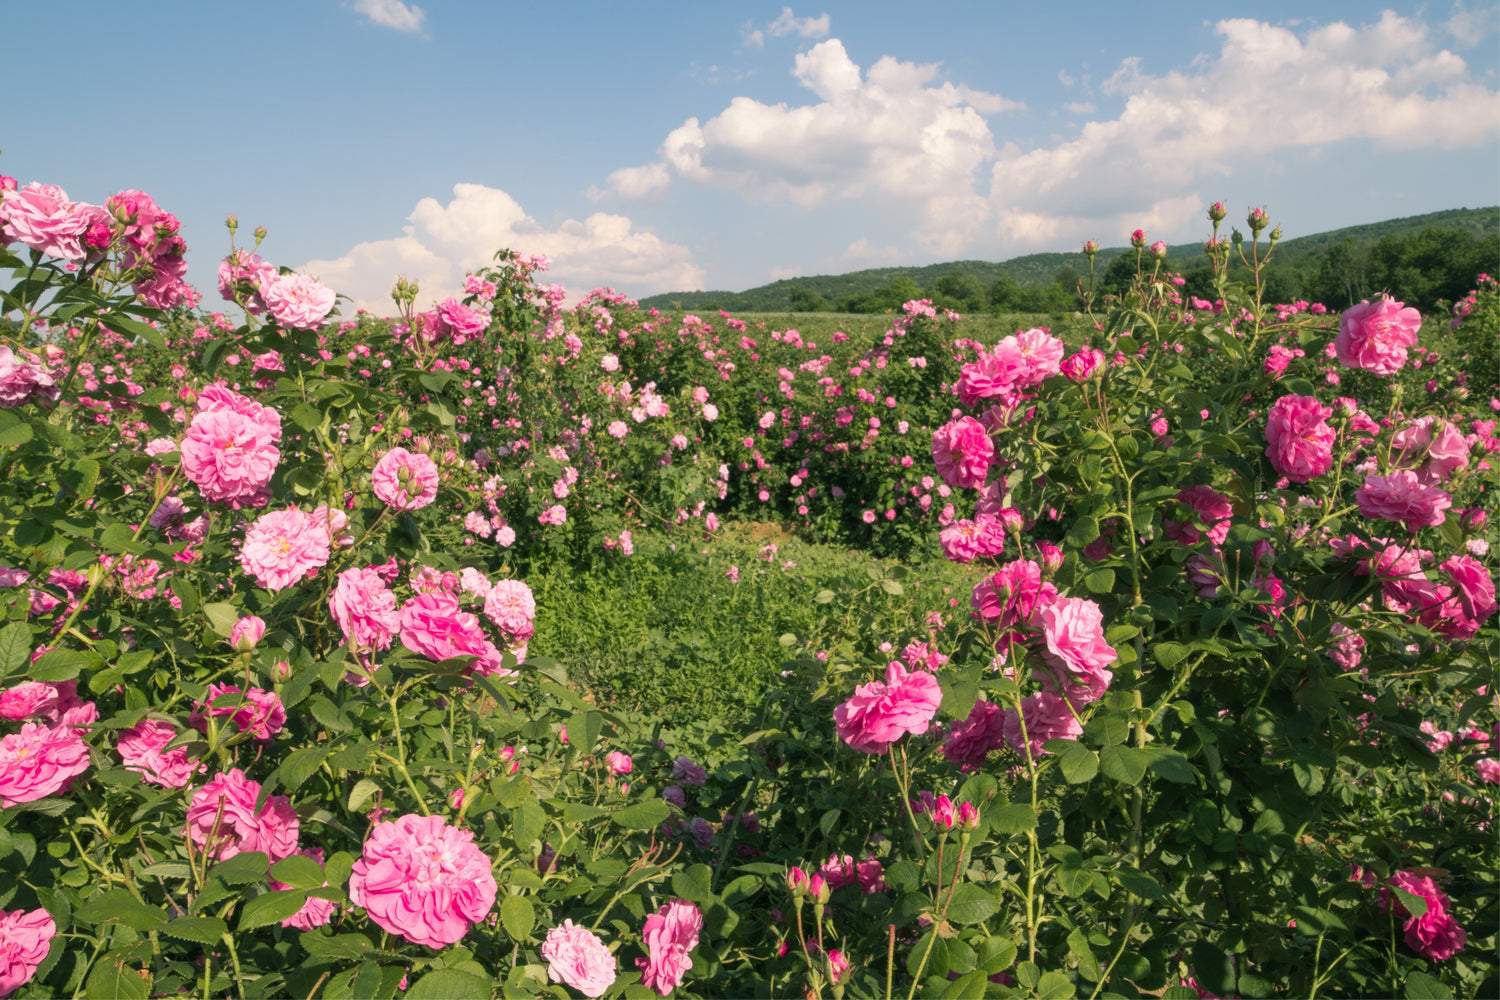 A picturesque field of blooming pink roses, including the exquisite Bulgarian rose and the fragrant Rosa Damascena. Each petal exudes a heavenly scent, captivating visitors with its enchanting